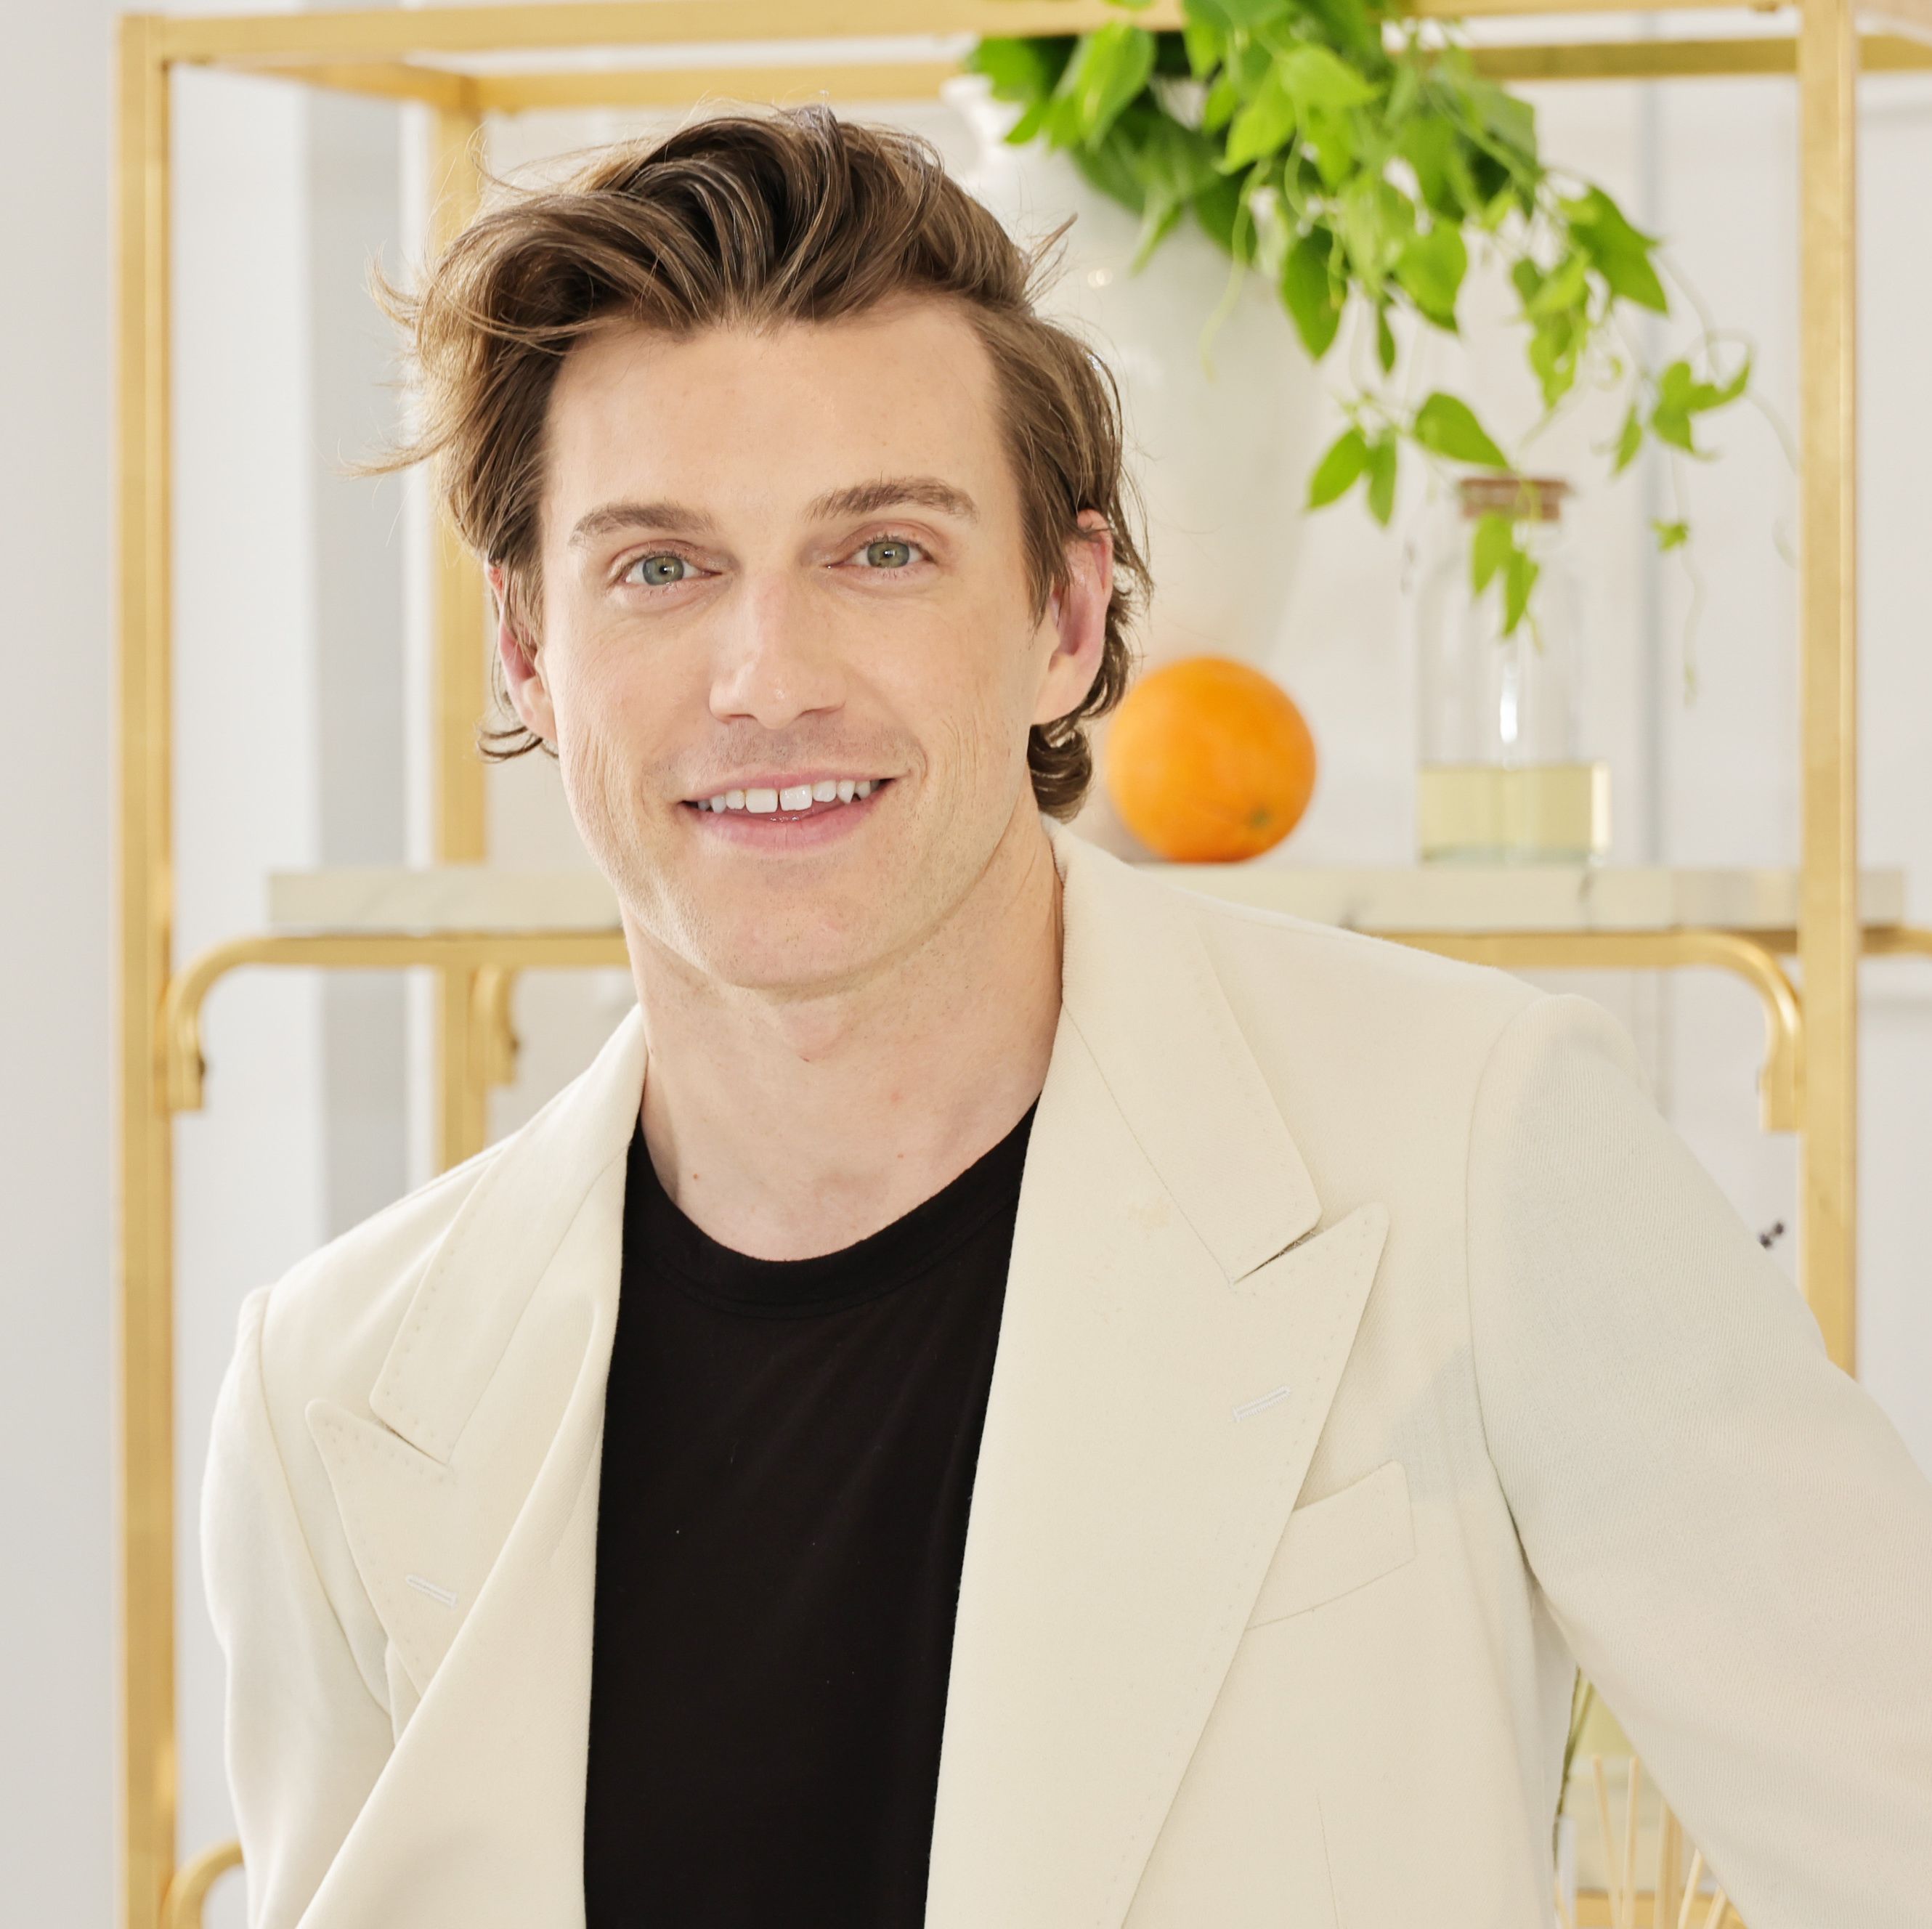 Everything You Need to Know About 'Queer Eye' Season 9 Newcomer Jeremiah Brent